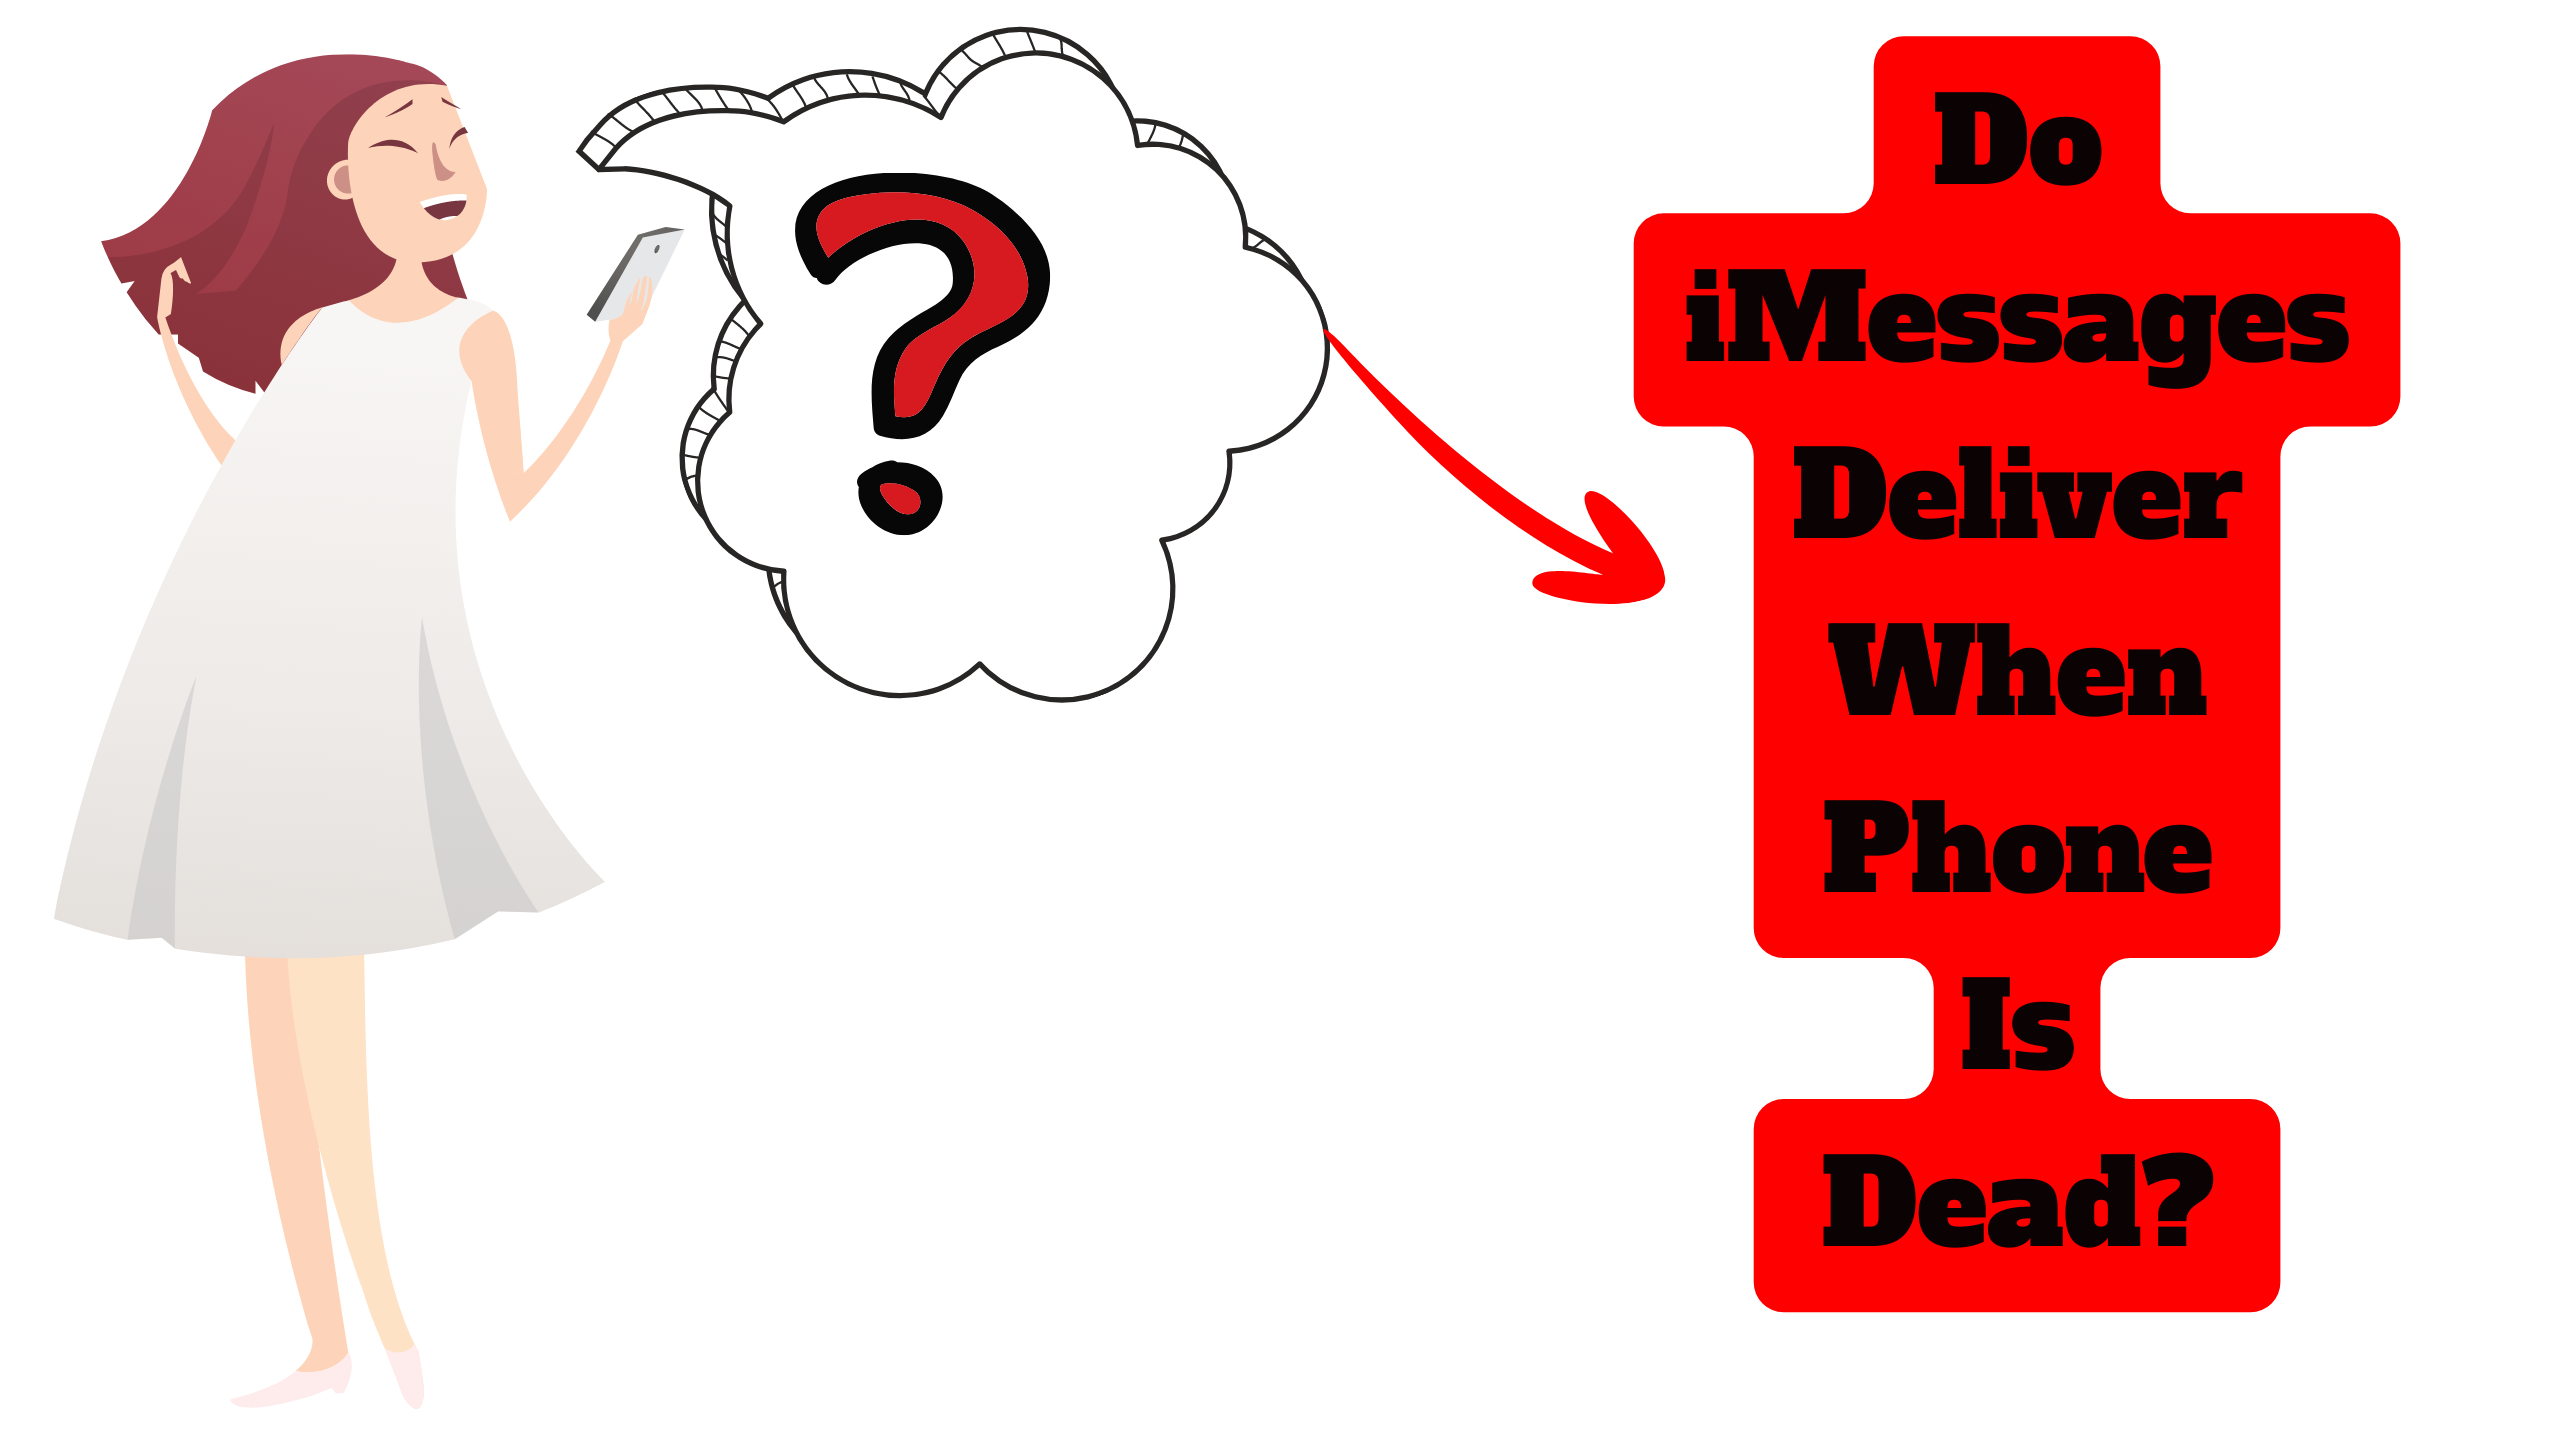 Do iMessages Deliver When Phone is Dead?